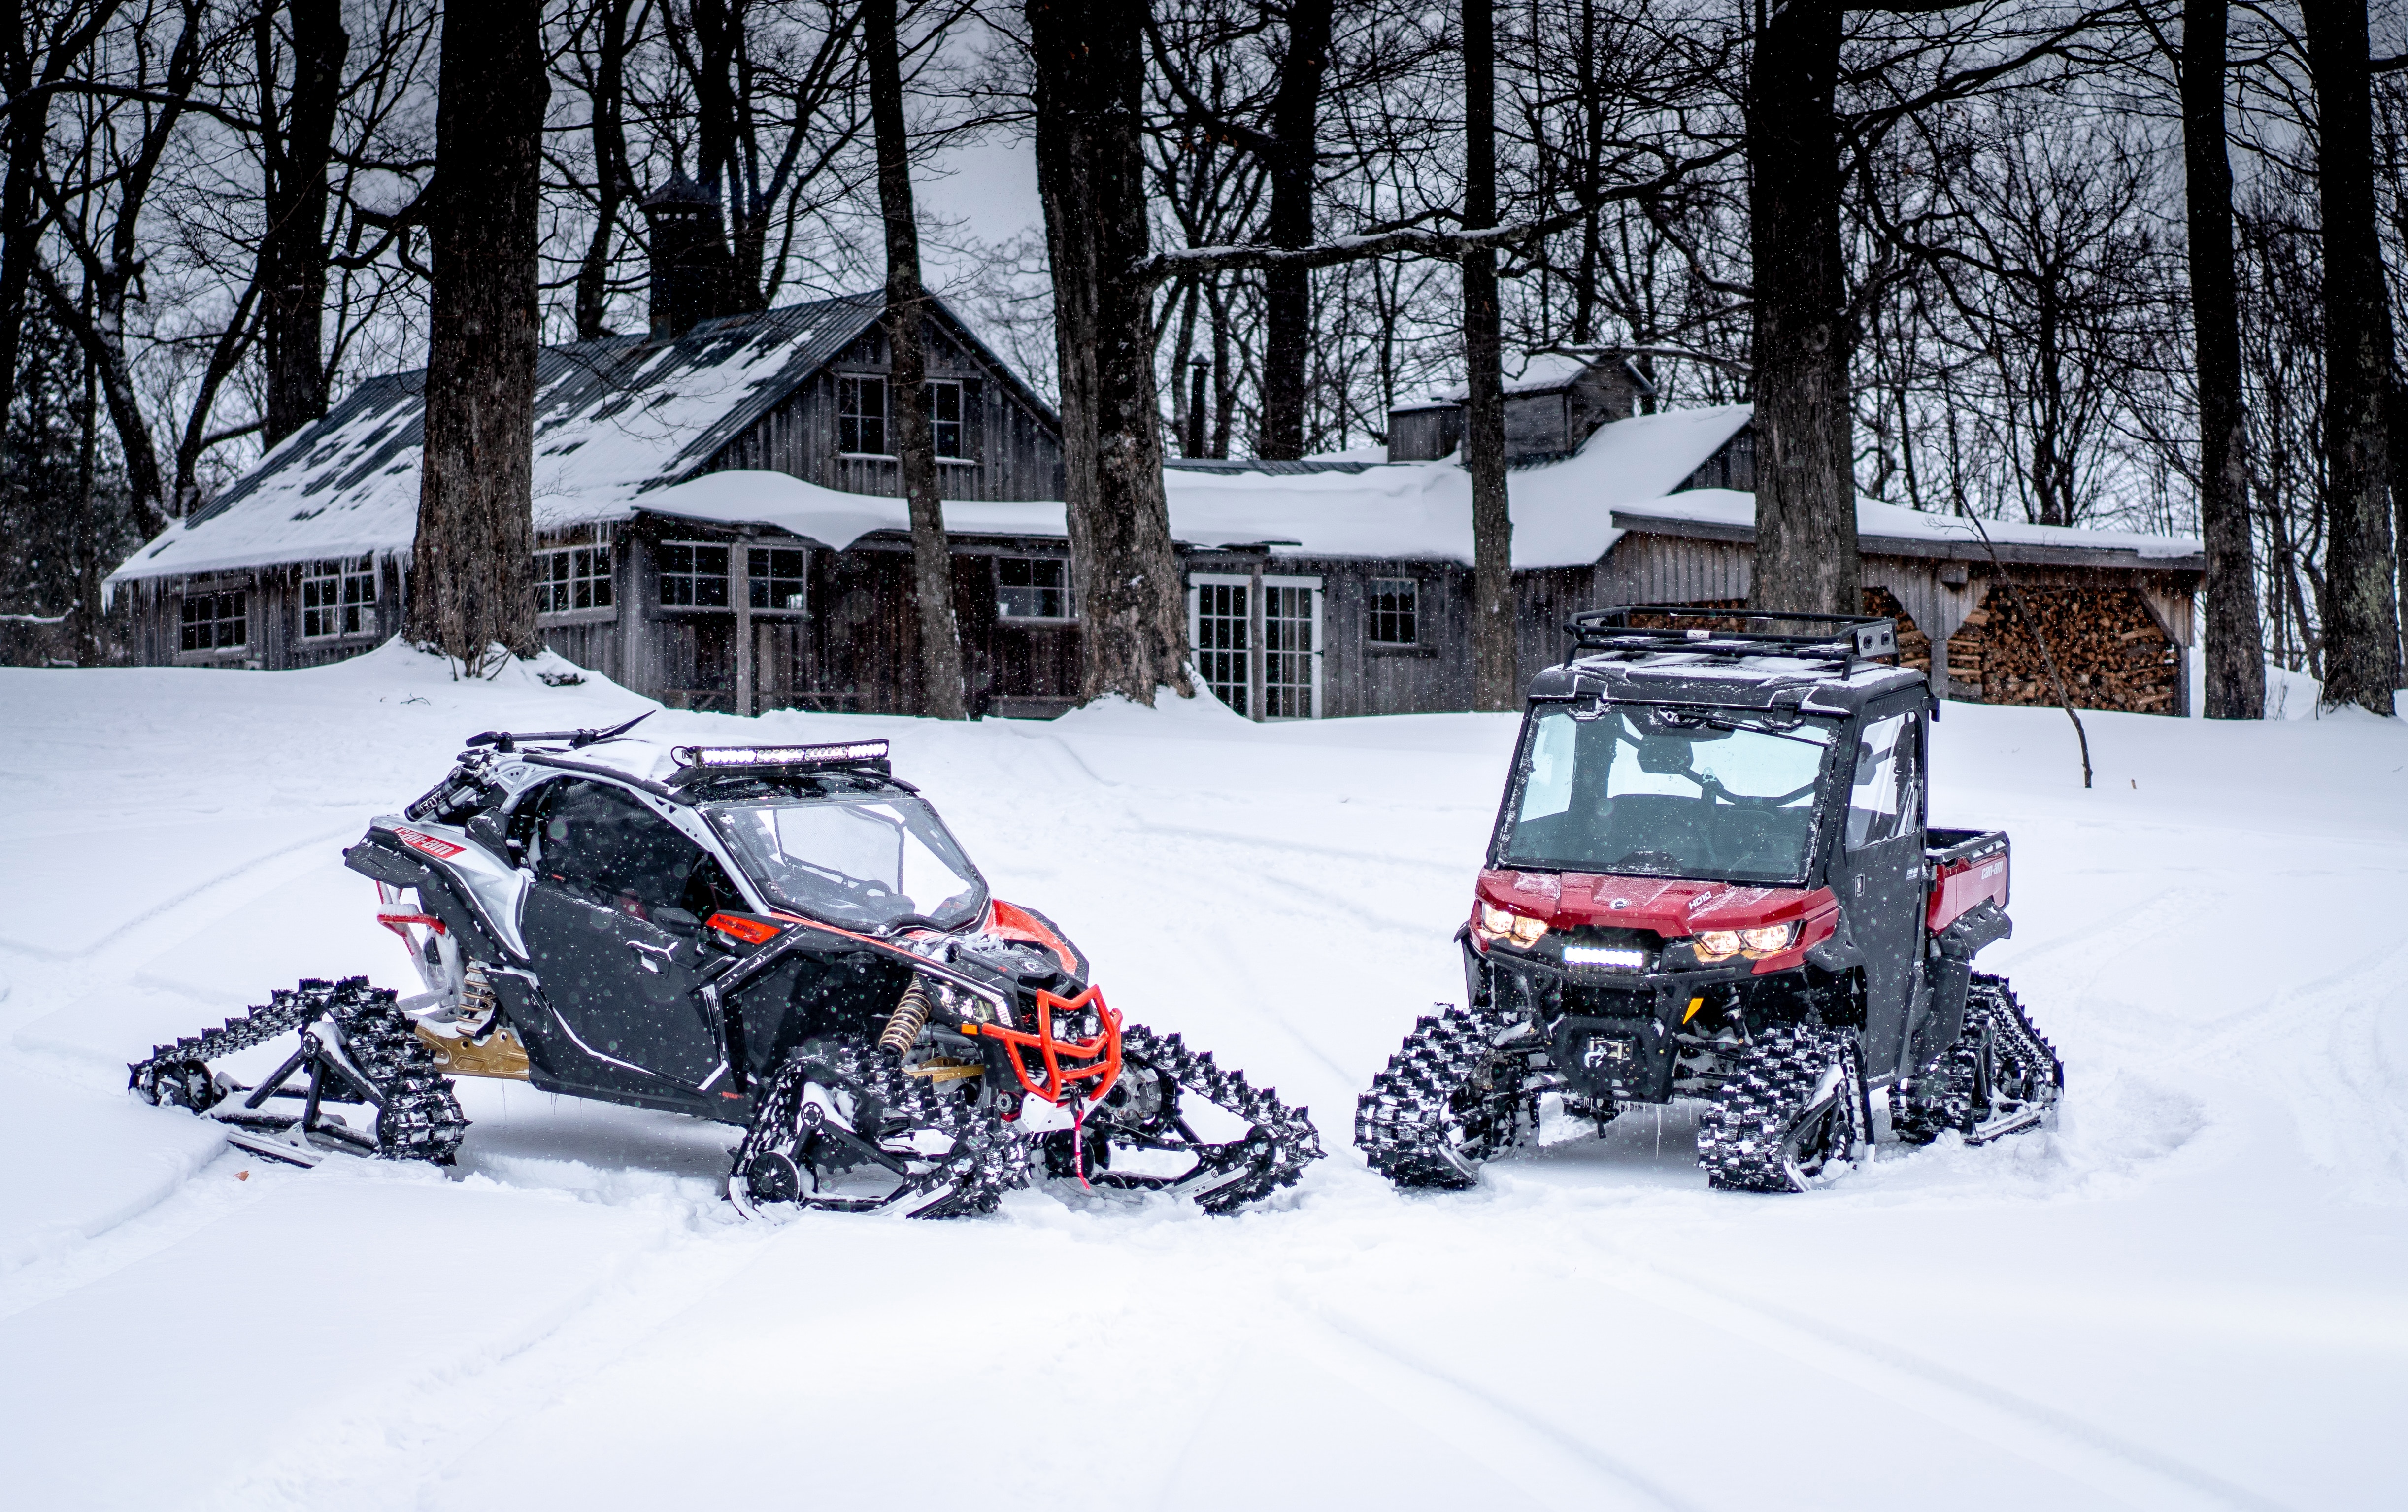 A Can-Am Maverick X3 and a Defender with track kits in the snow near a wooden chalet